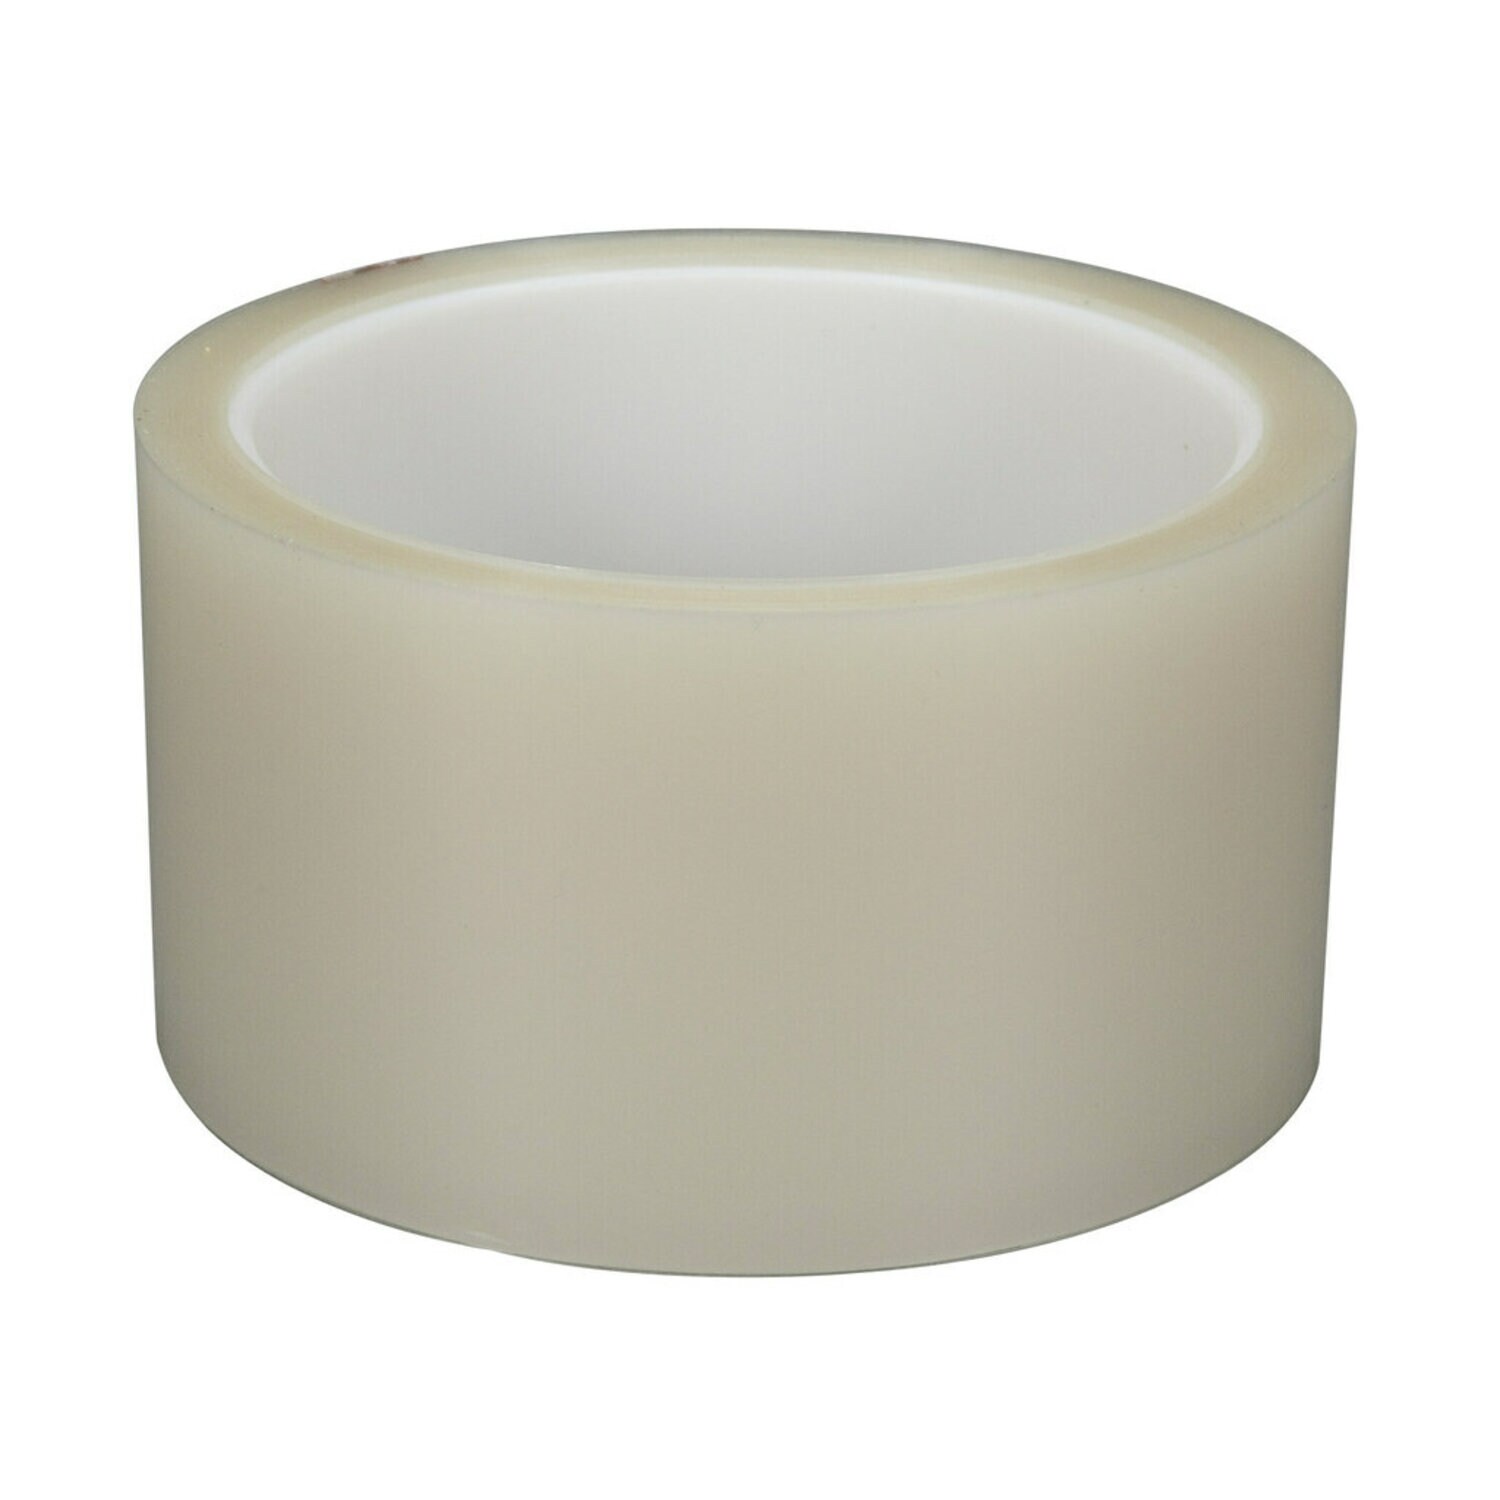 7010045194 - 3M Polyester Film Tape 853, Transparent, 5 1/4 in x 360 yd, 2.2 mil, 2
Rolls/Case, Plastic Core